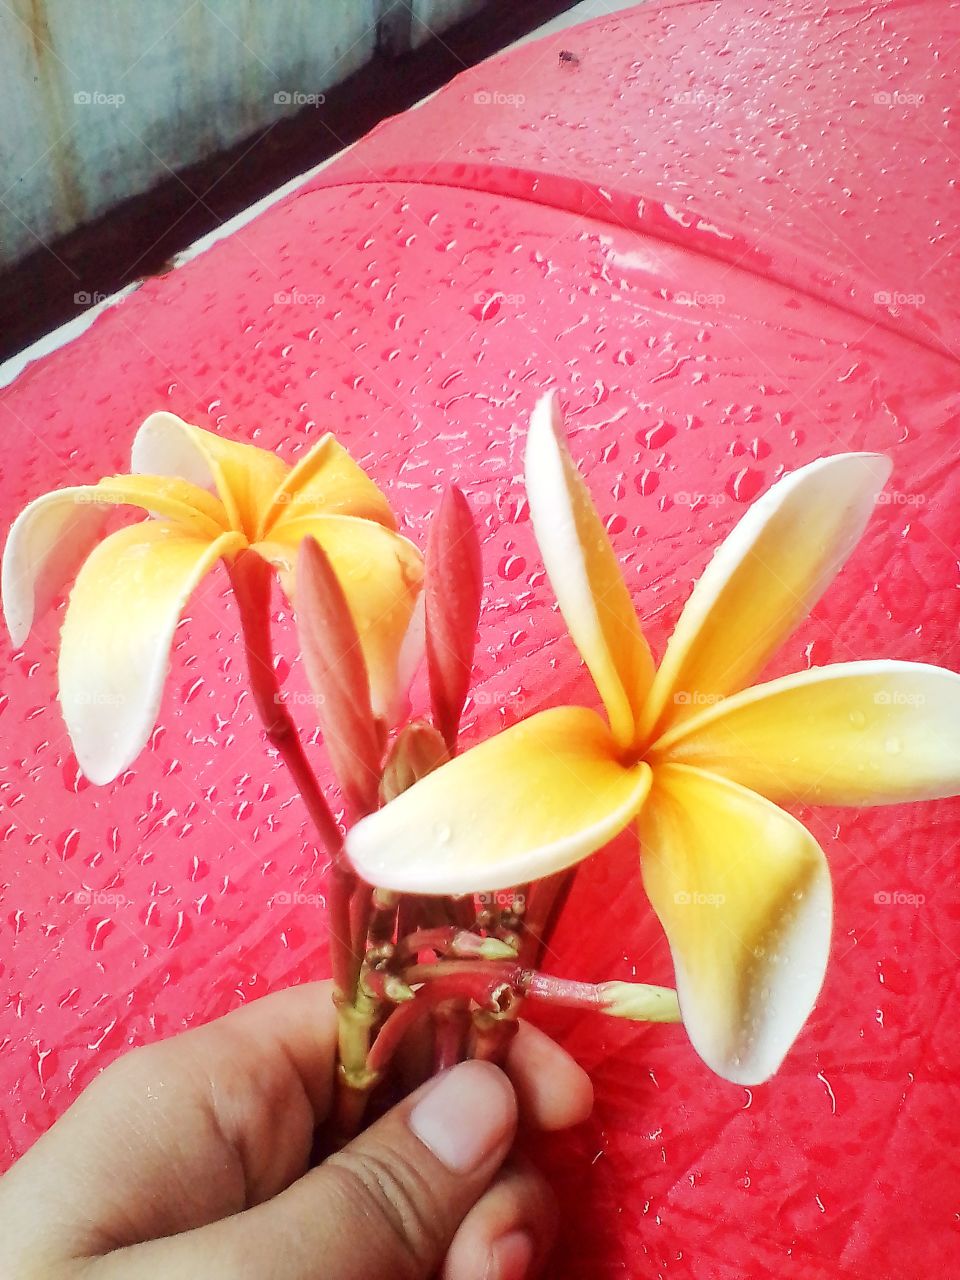 A hand holding frangipani flowers with a red umbrella background